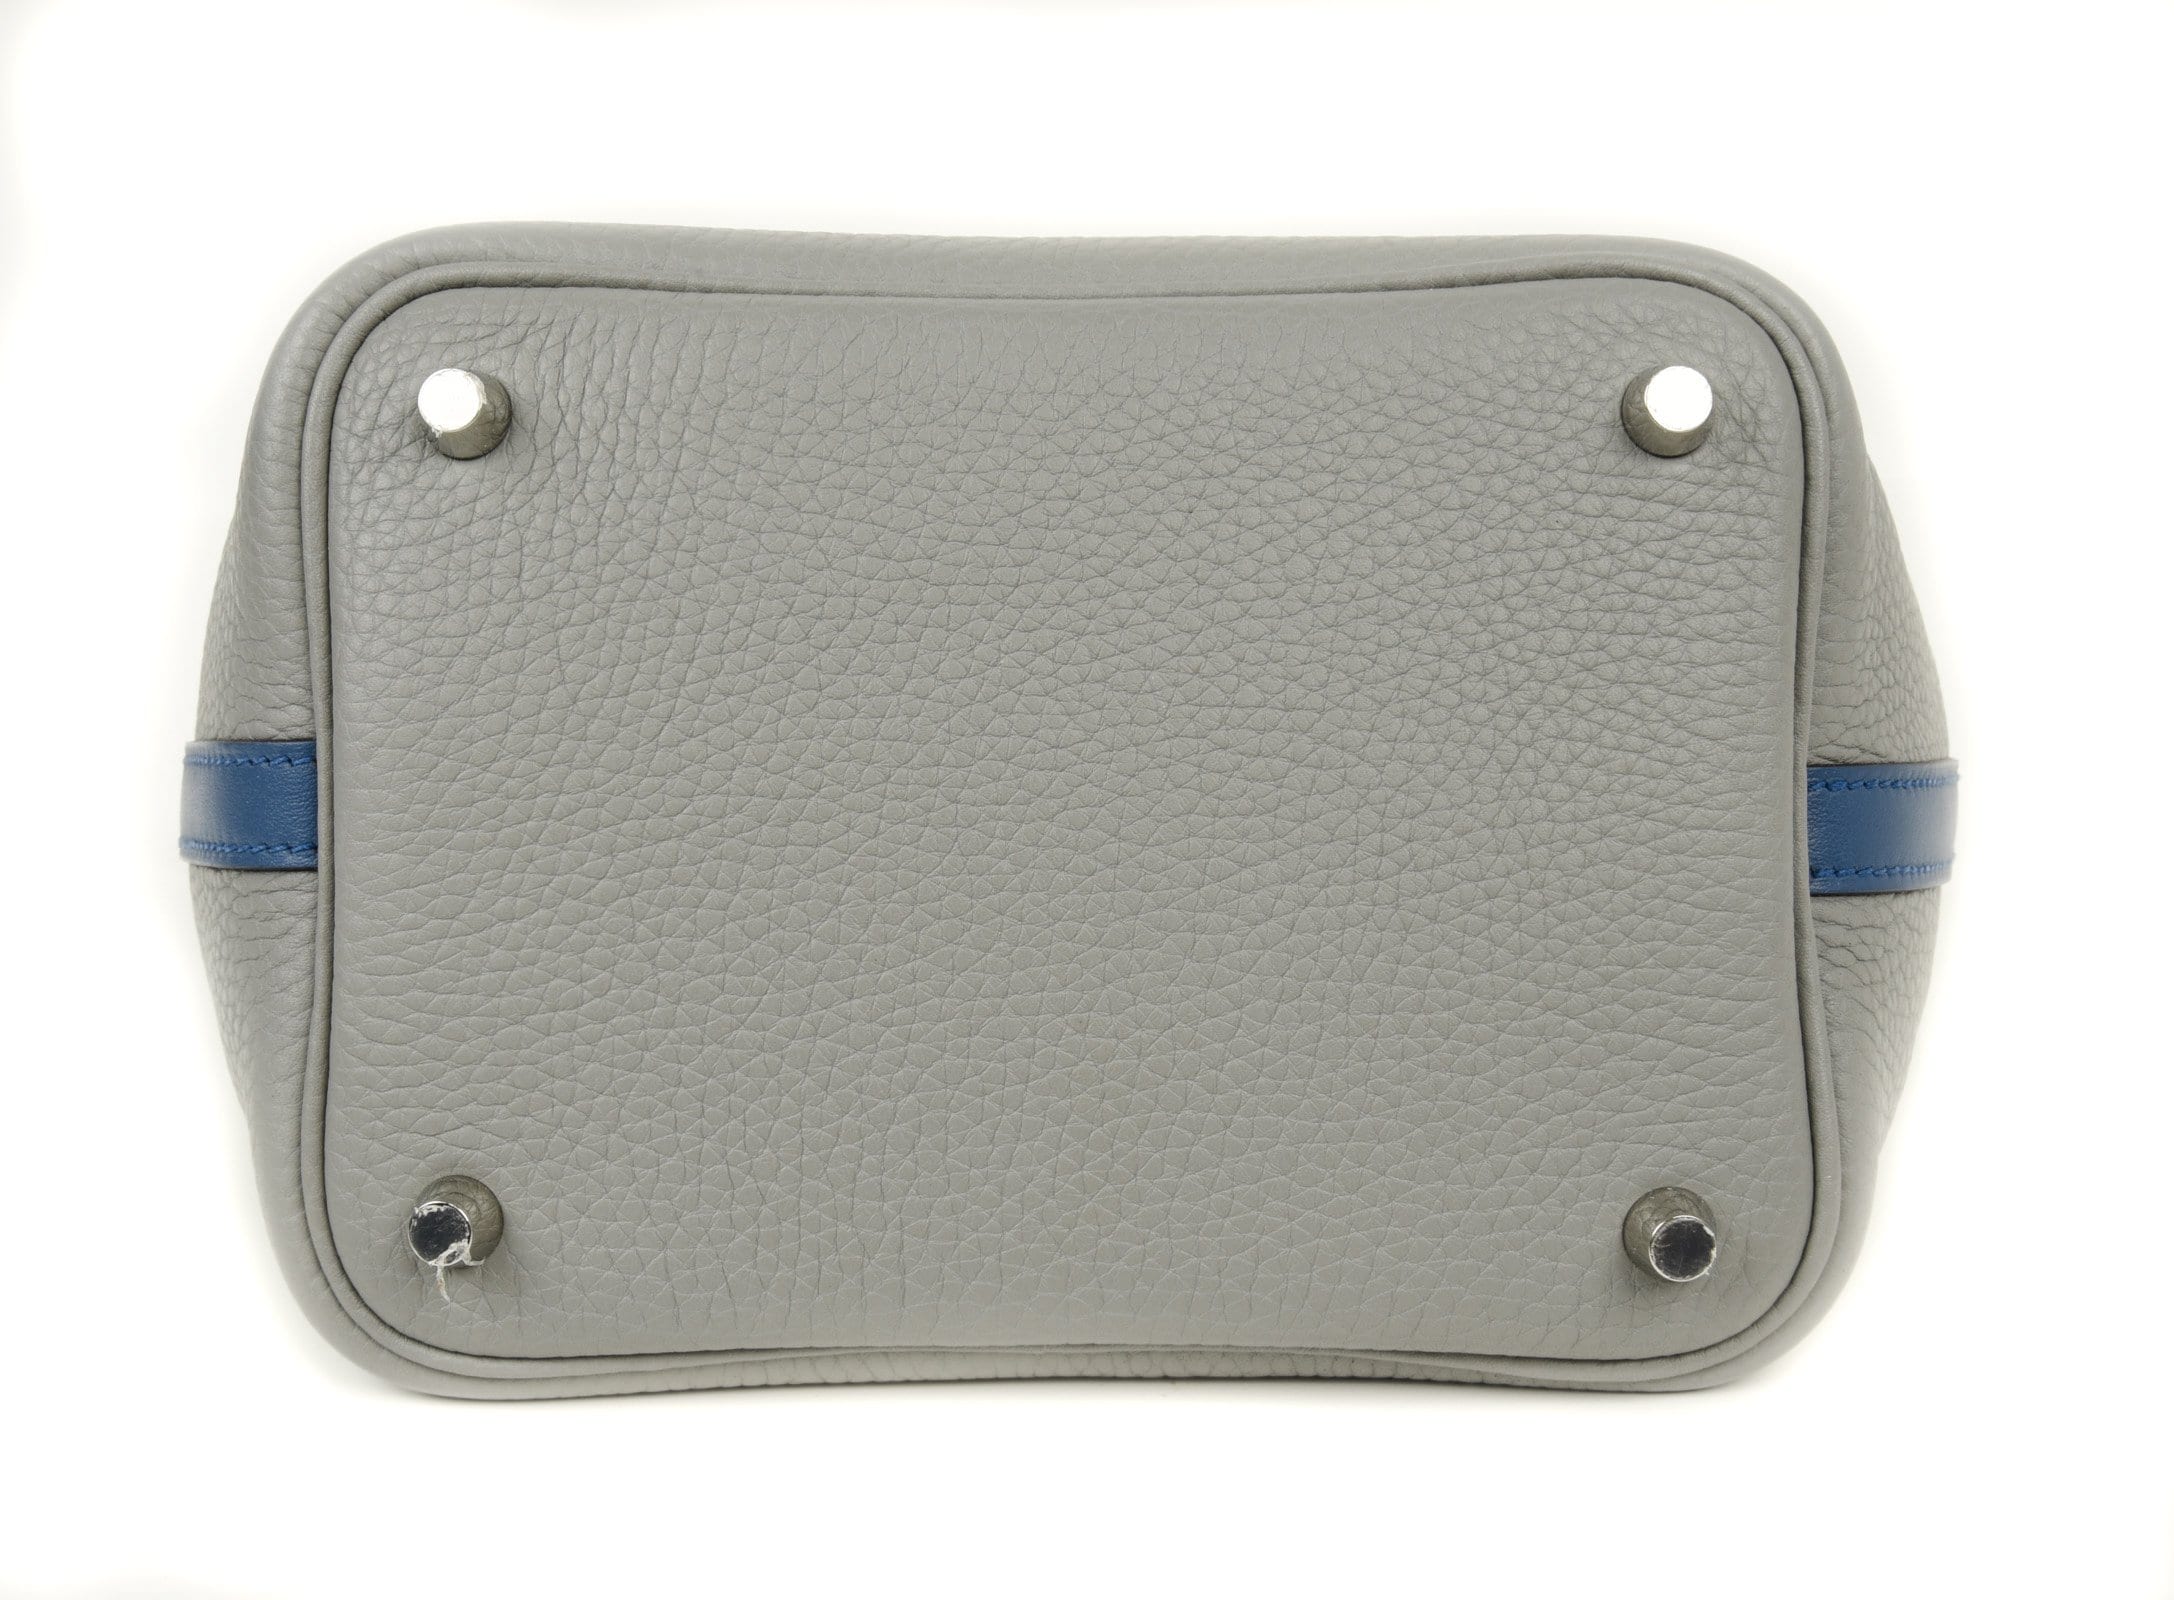 Hermes Picotin Lock Touch Bag 18cm Gris Mouette Blue Agate Limited Edi –  Mightychic